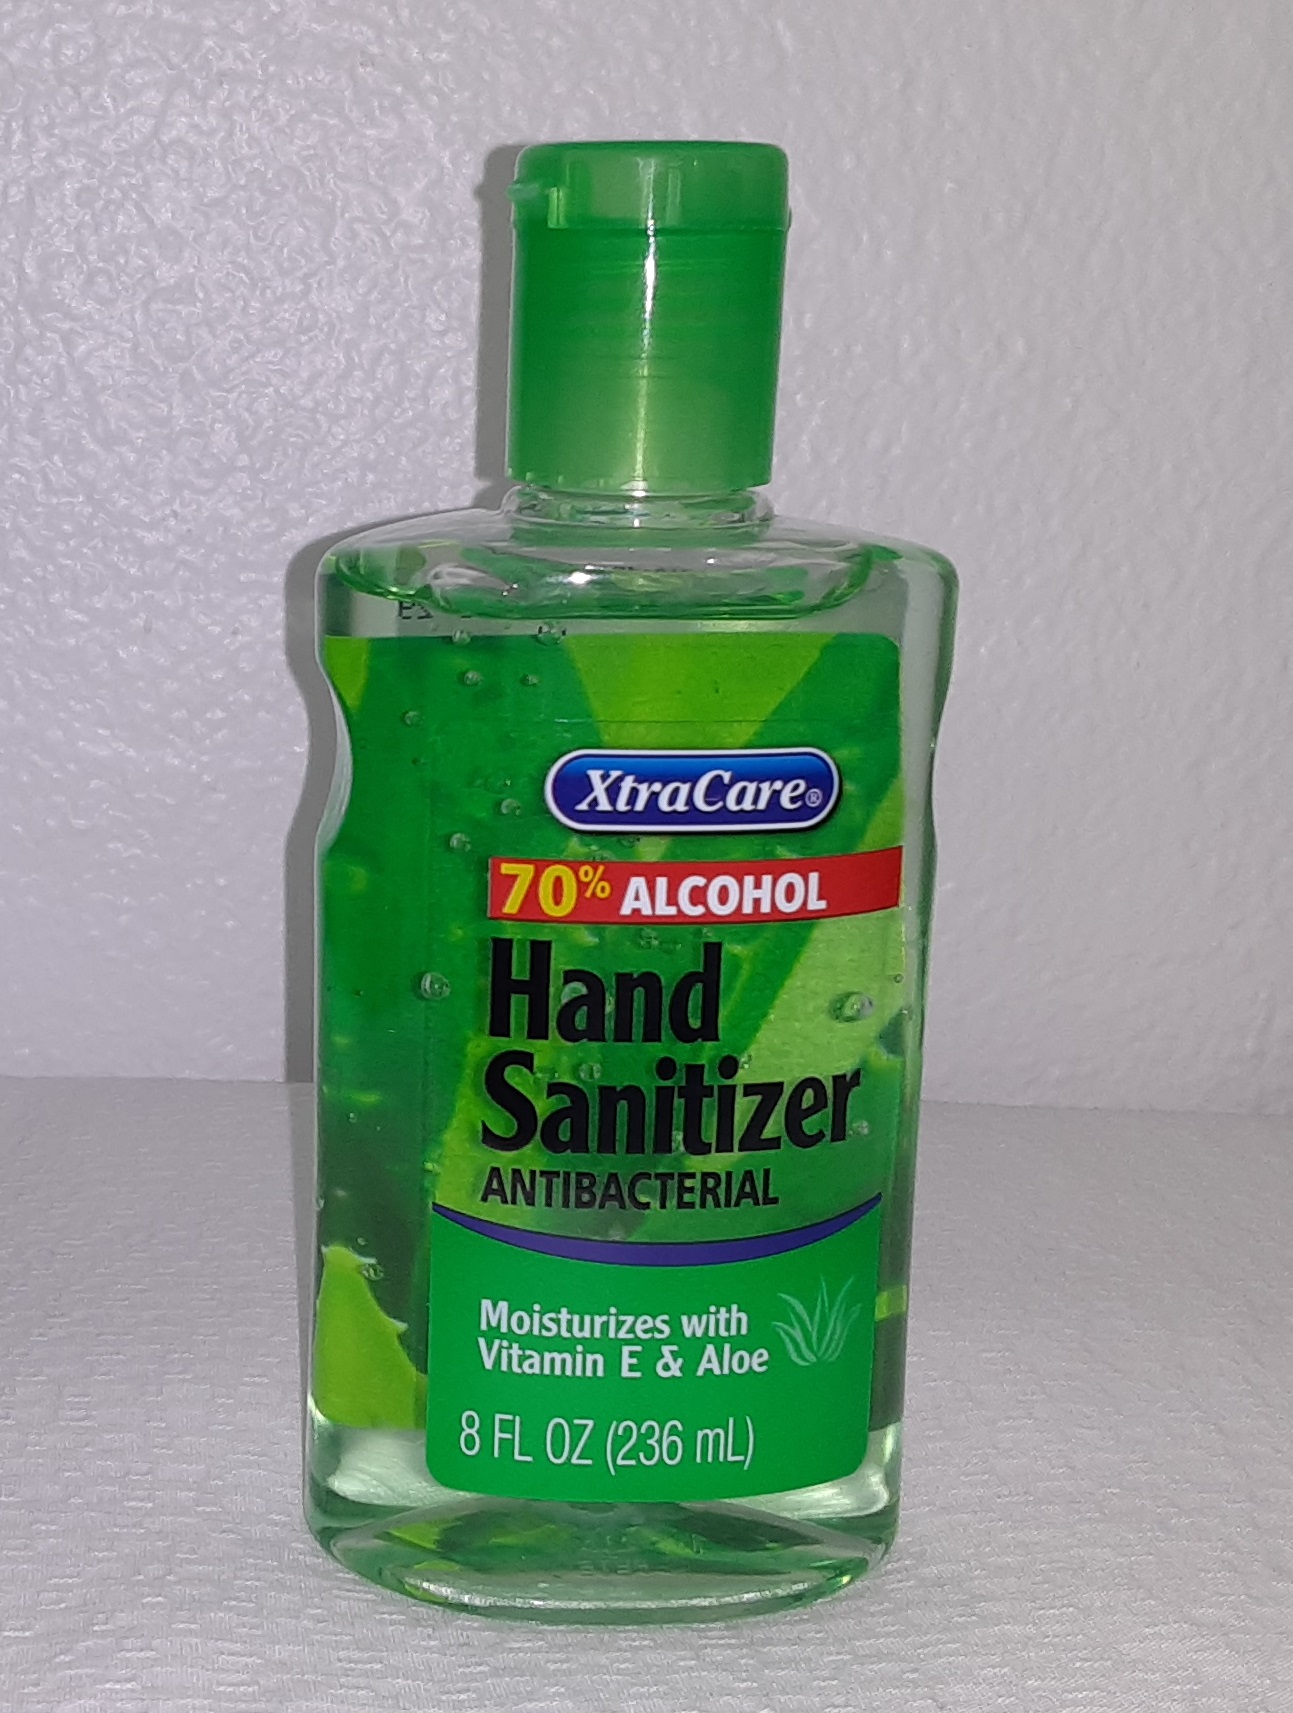 XtraCare Hand Sanitizer Gel 8fl oz - 70% Alcohol - Antibacterial - Moisturizes with Vitamin E and Aloe